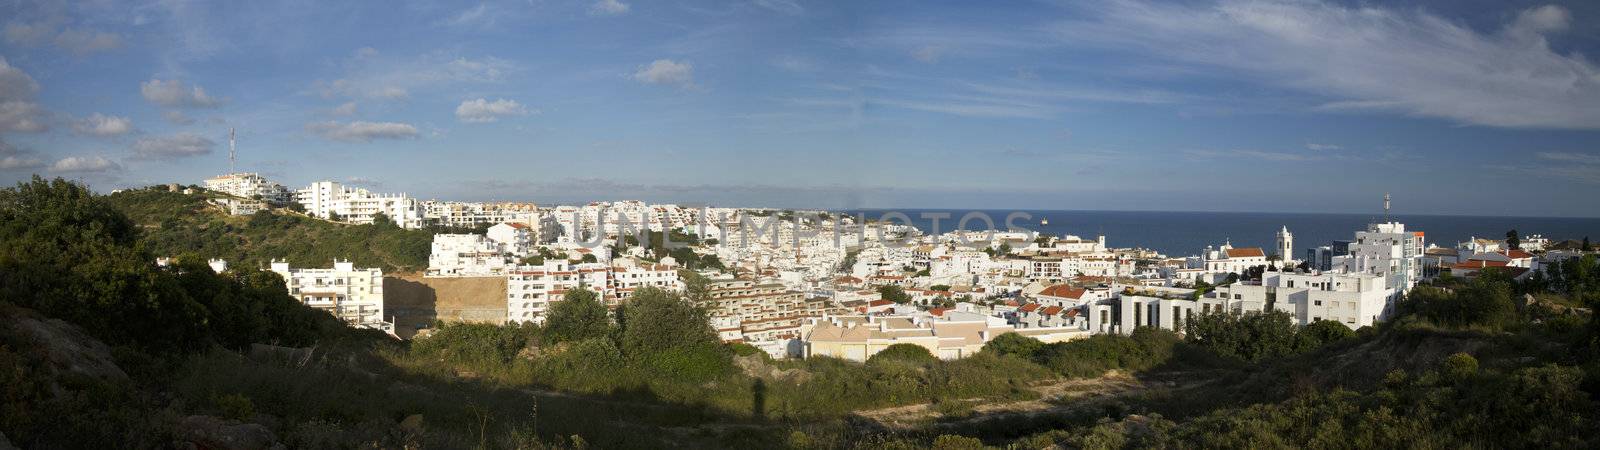 Panoramic view of the Albufeira city located on the Algarve, Portugal.